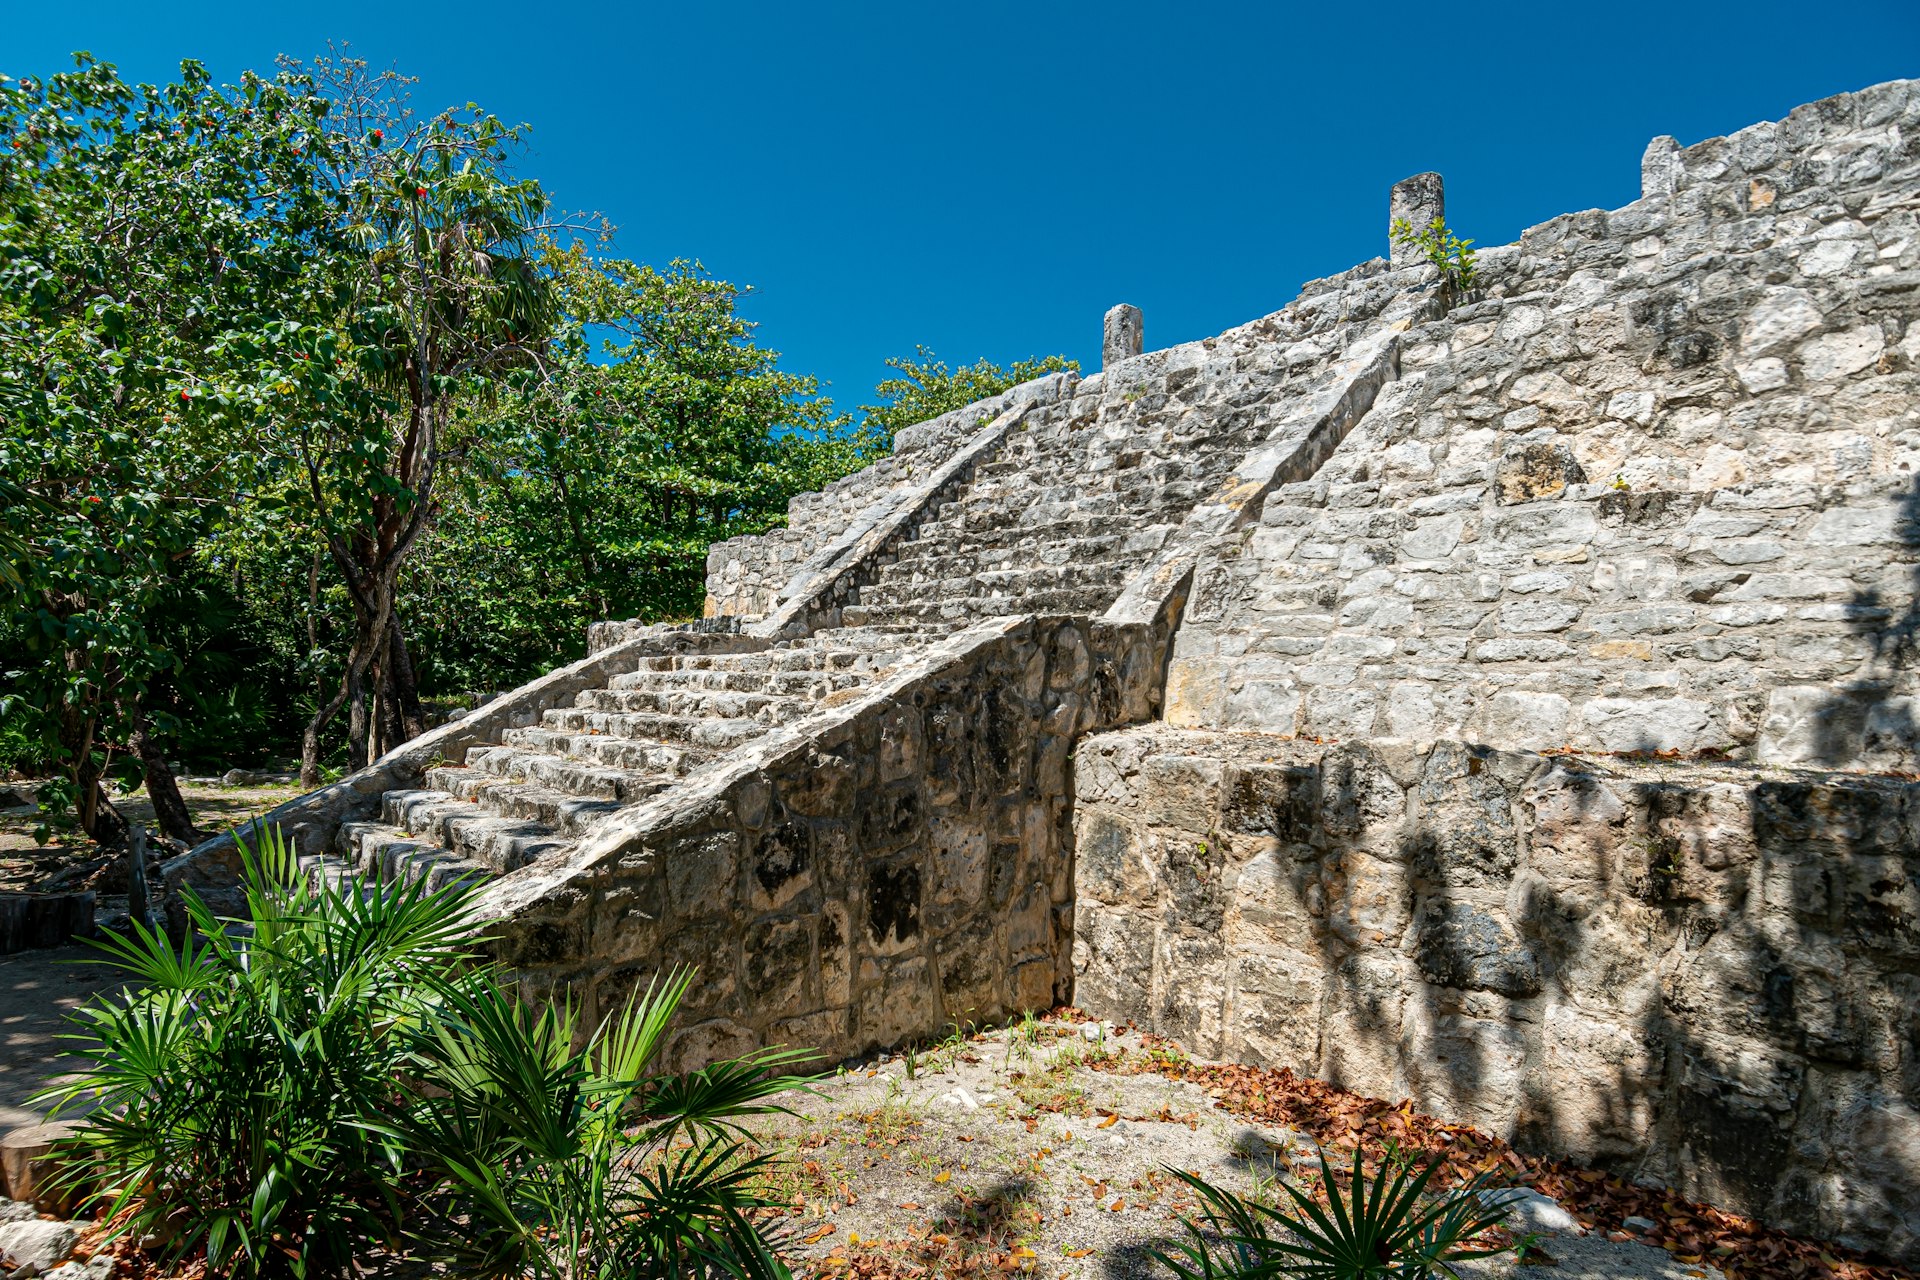 A view of a staircase leading up a Maya pyramid ruin outside of Cancún